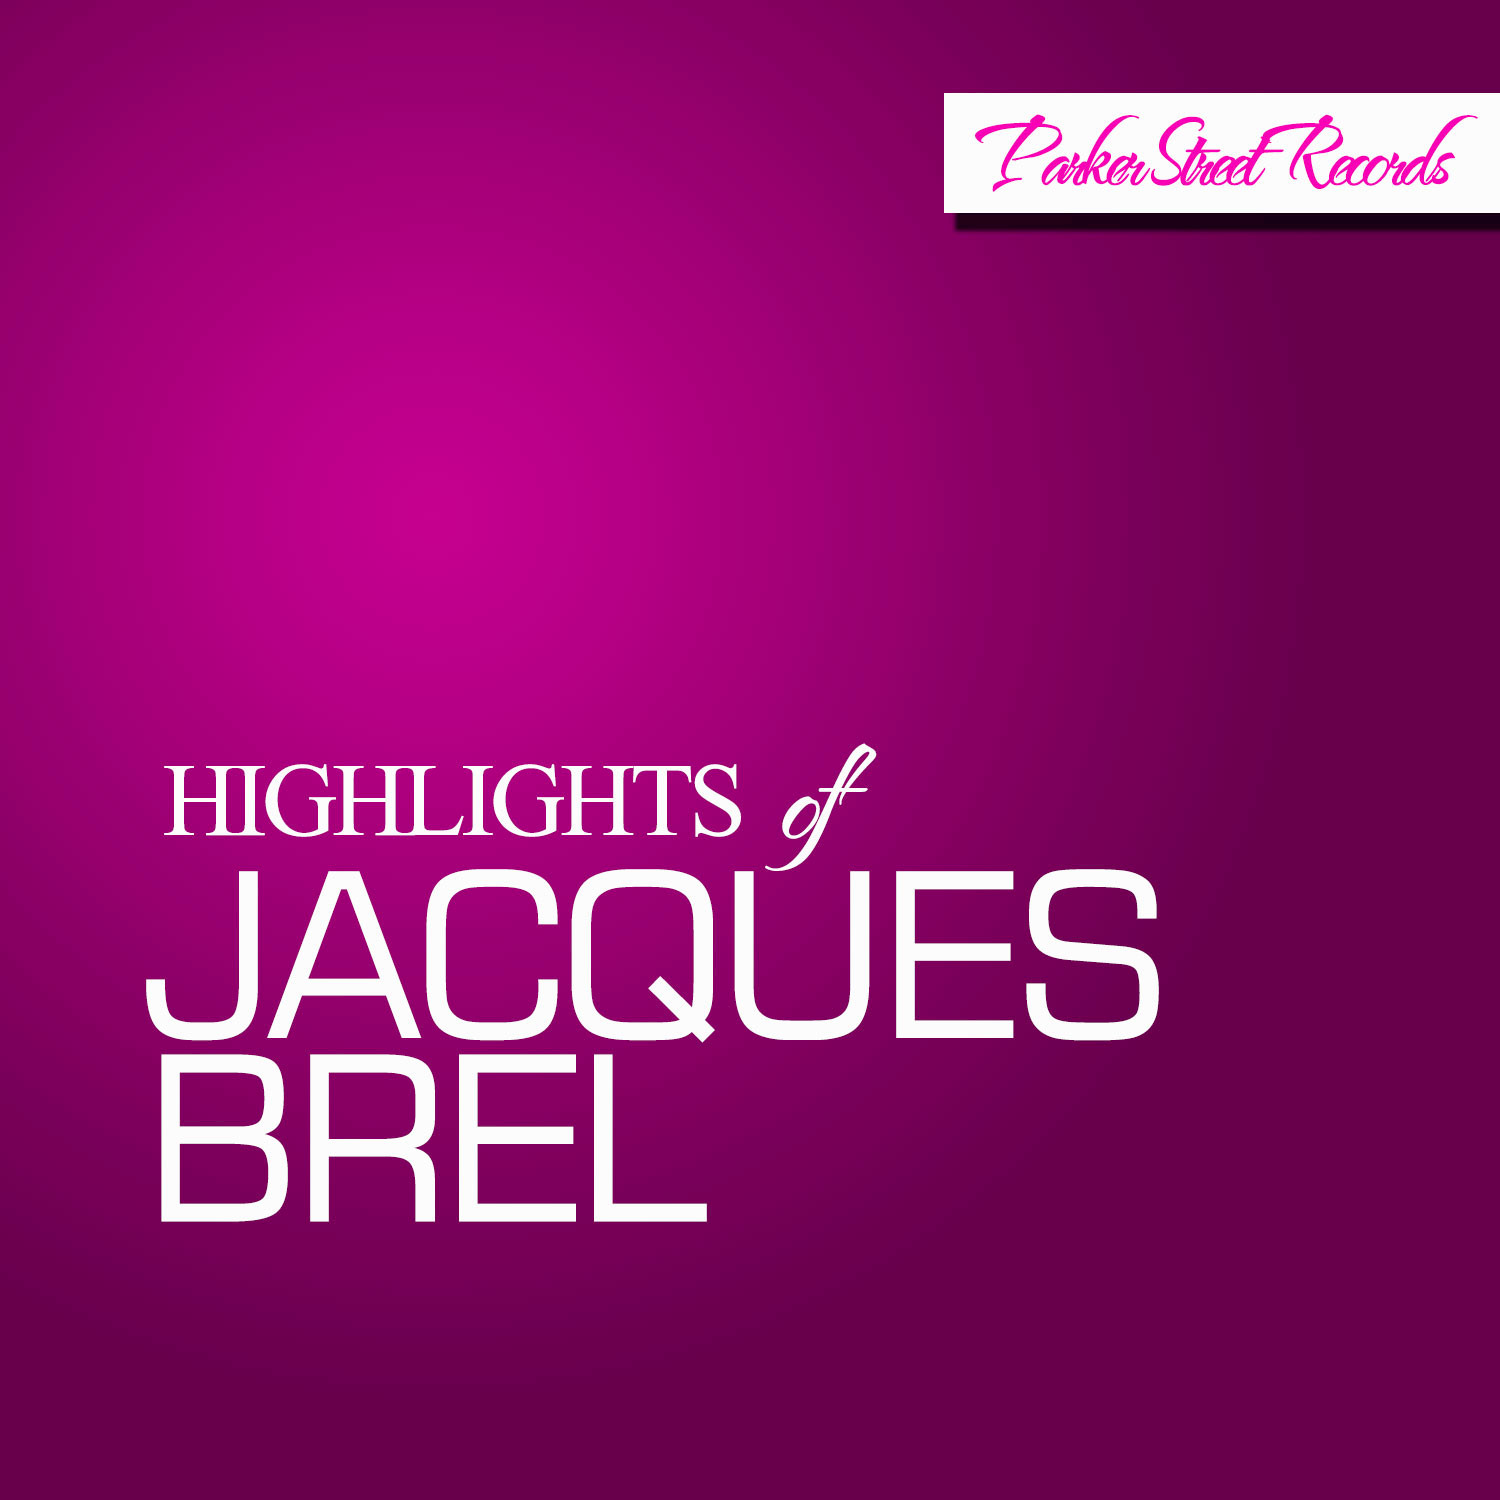 Highlights of Jacques Brel